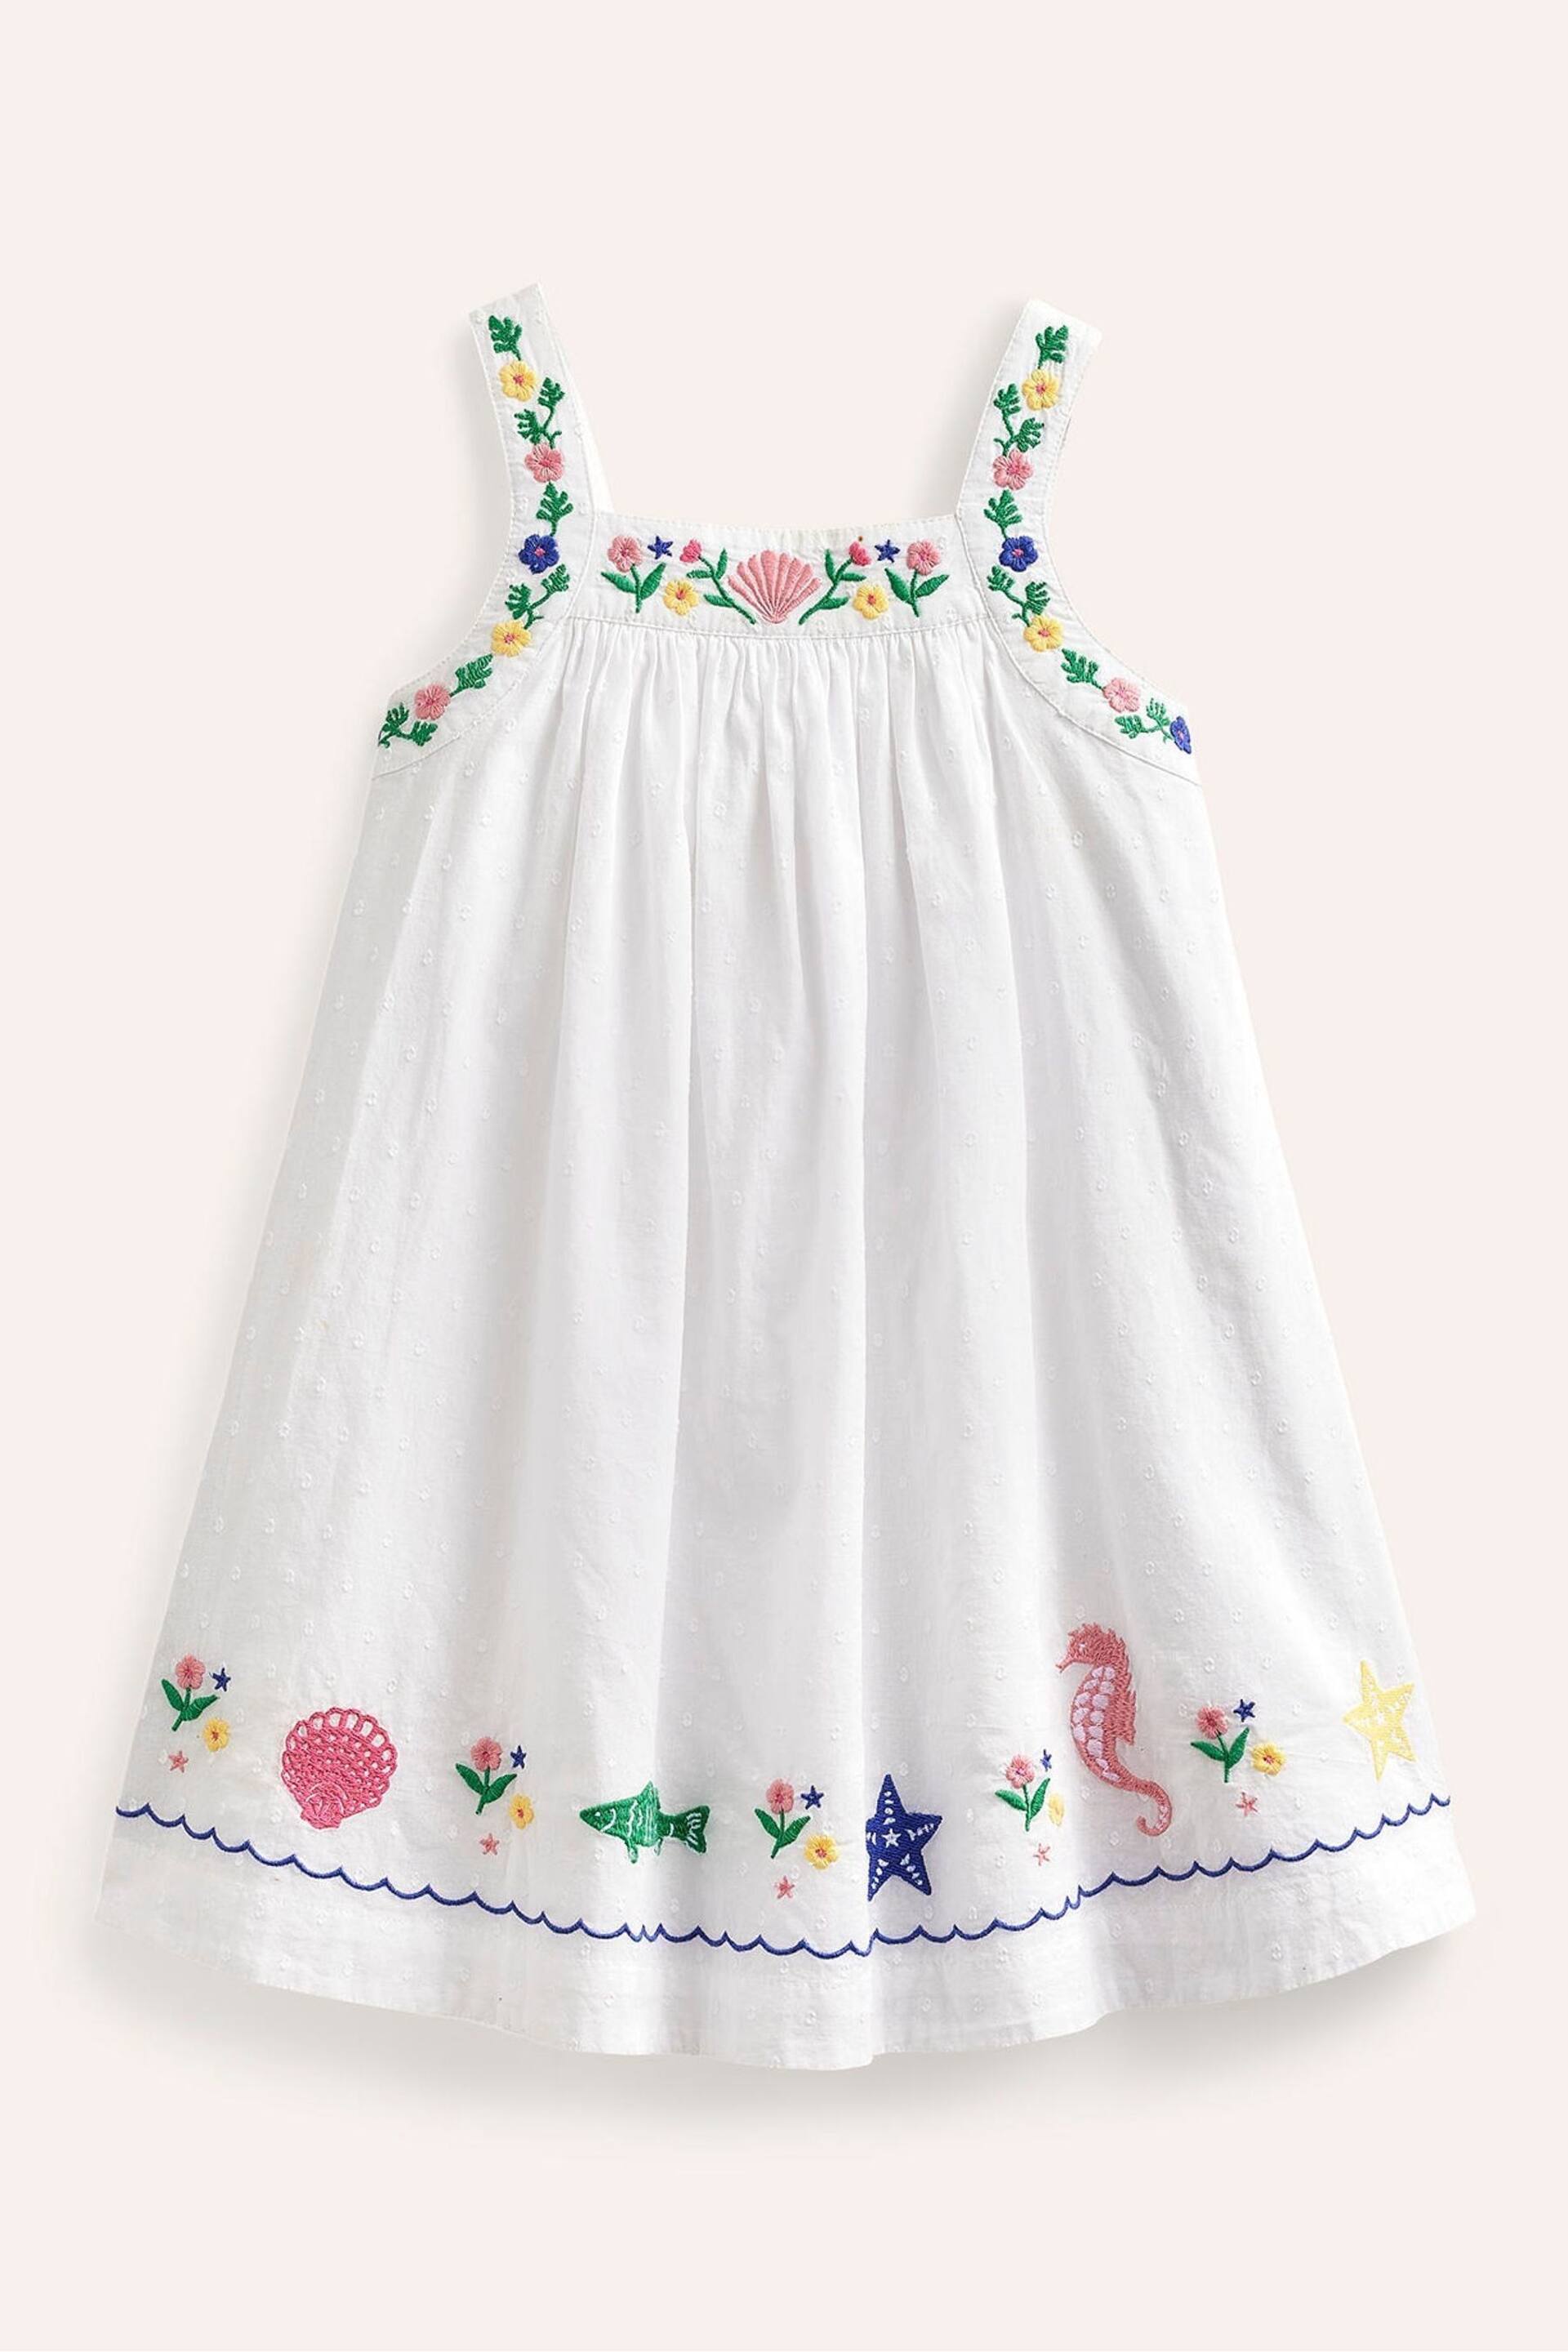 Boden Cream Ric Rac Embroidered Dress - Image 2 of 4